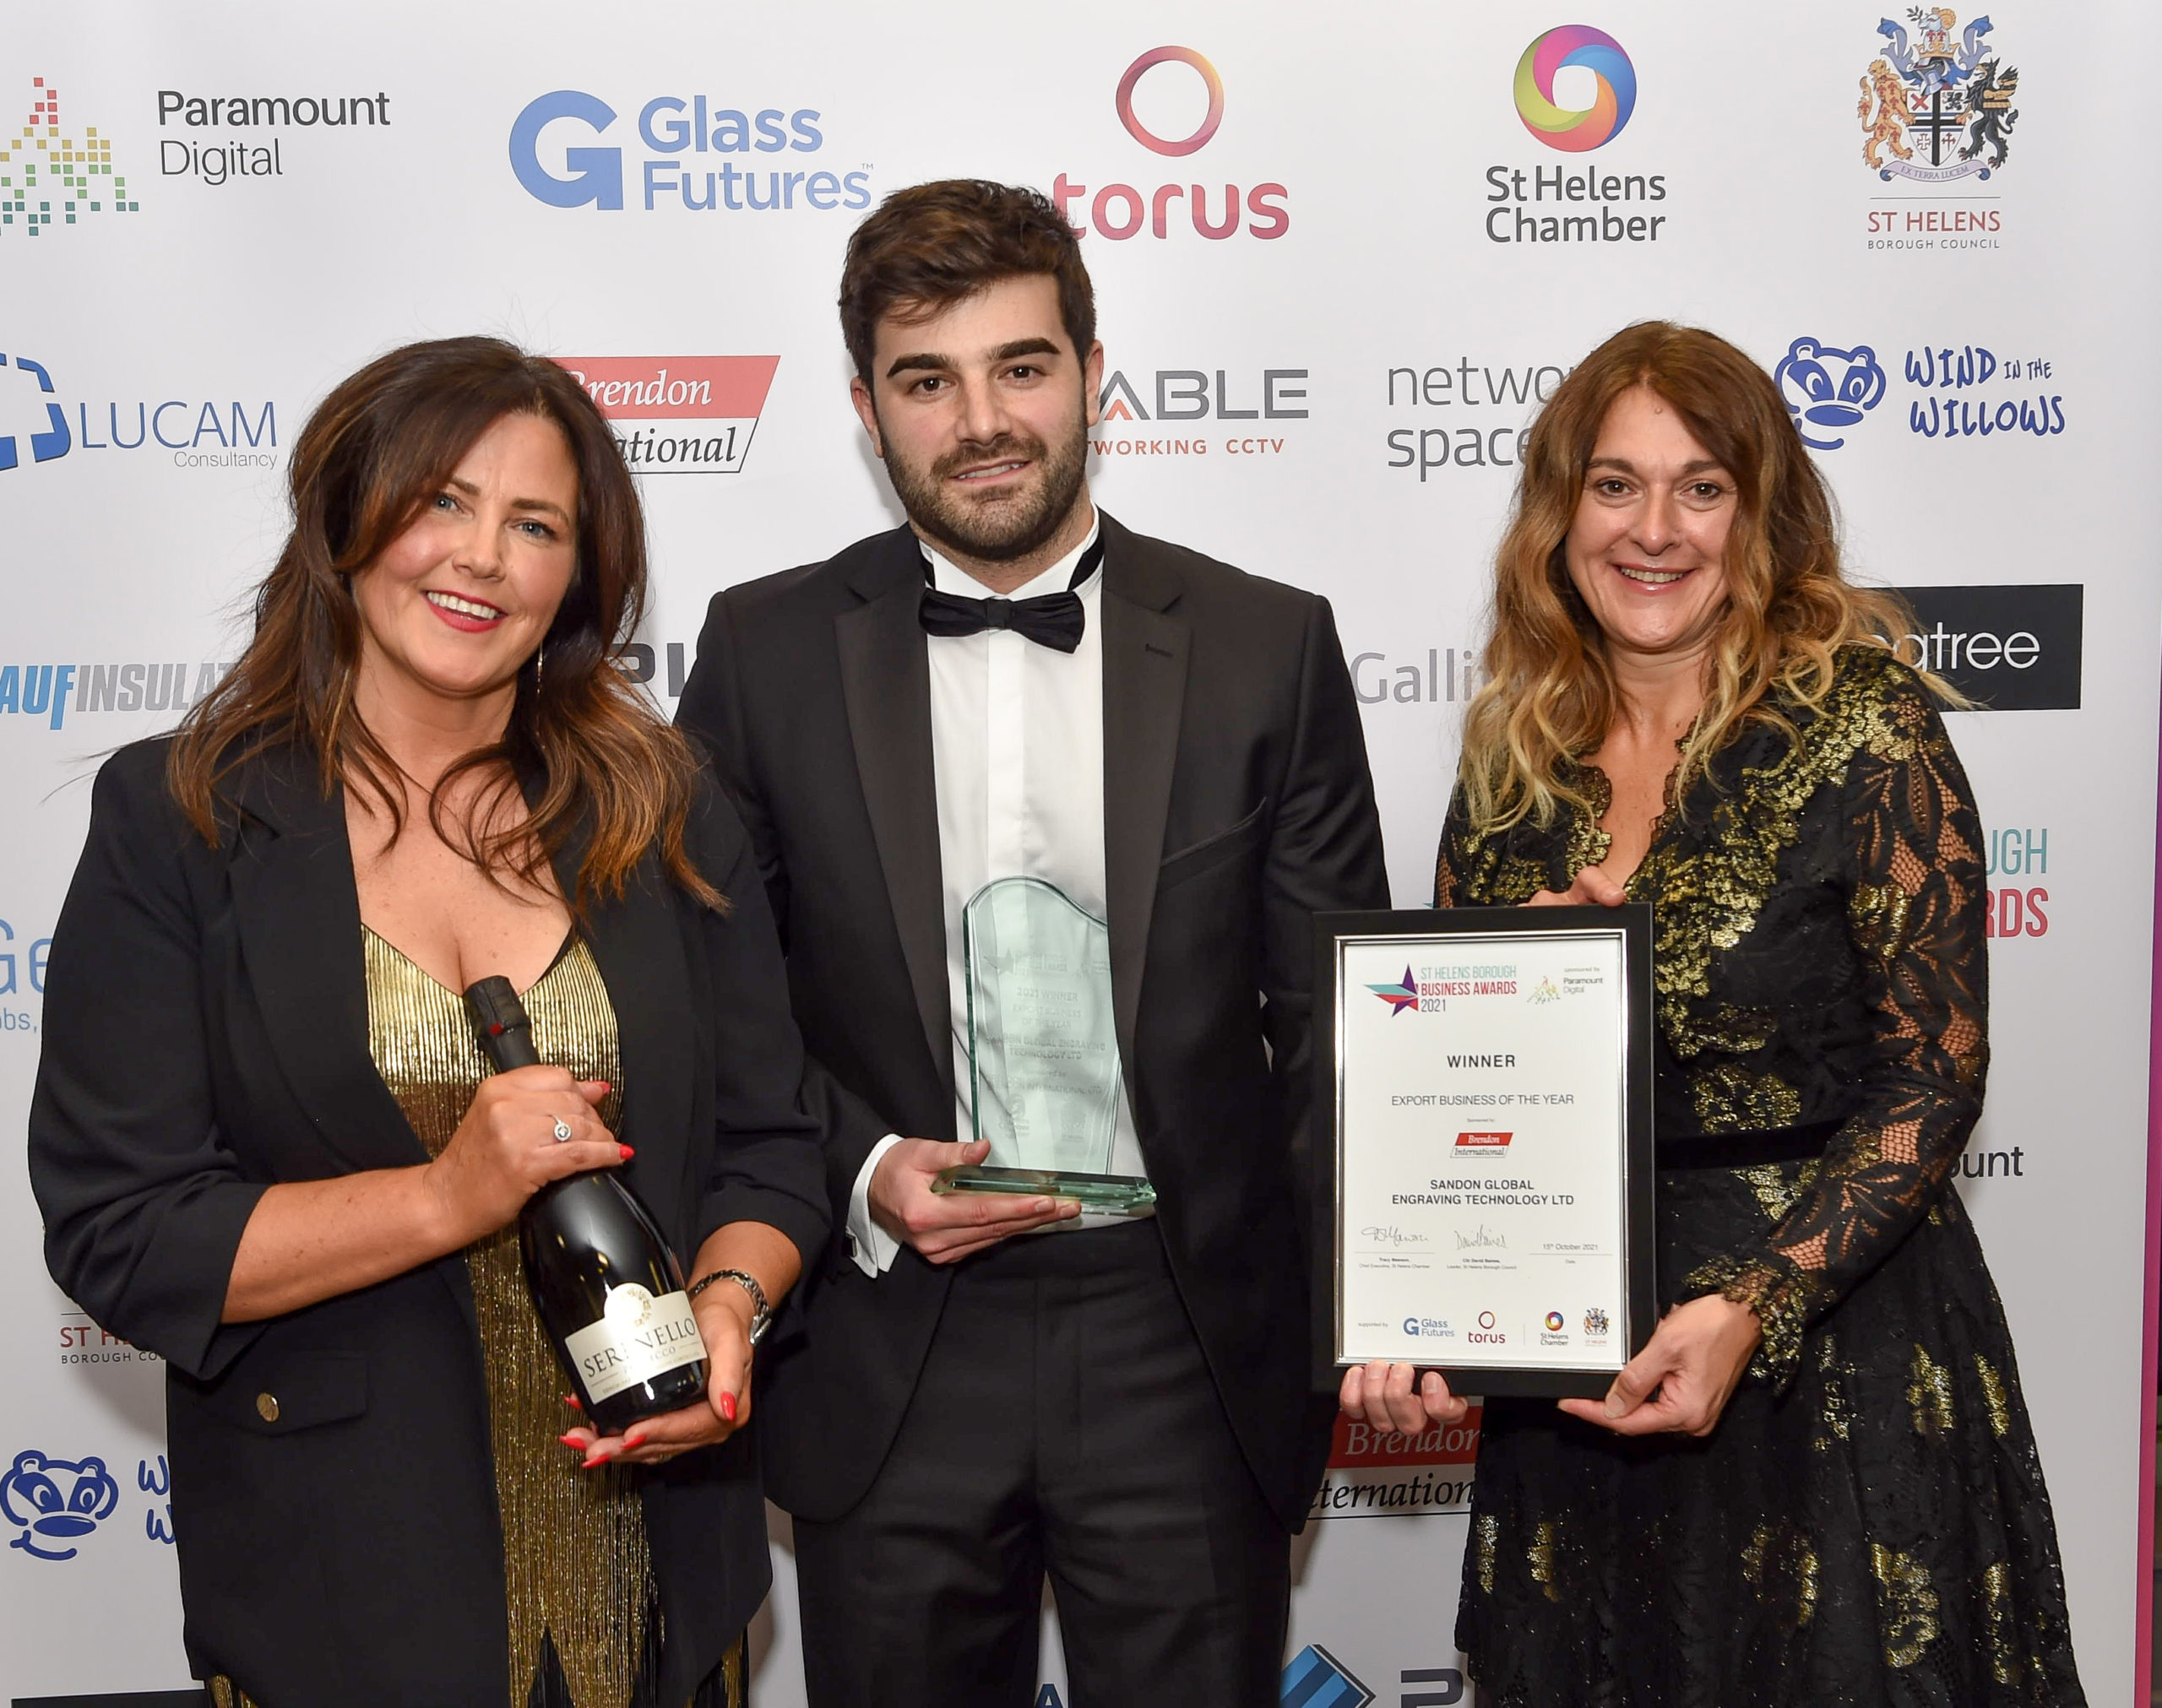 Pictured left to right_Sue Fitzmaurice and Jake Roberts accepting the award on behalf of Sandon Global. Presented by a representative from St. Helens Chamber